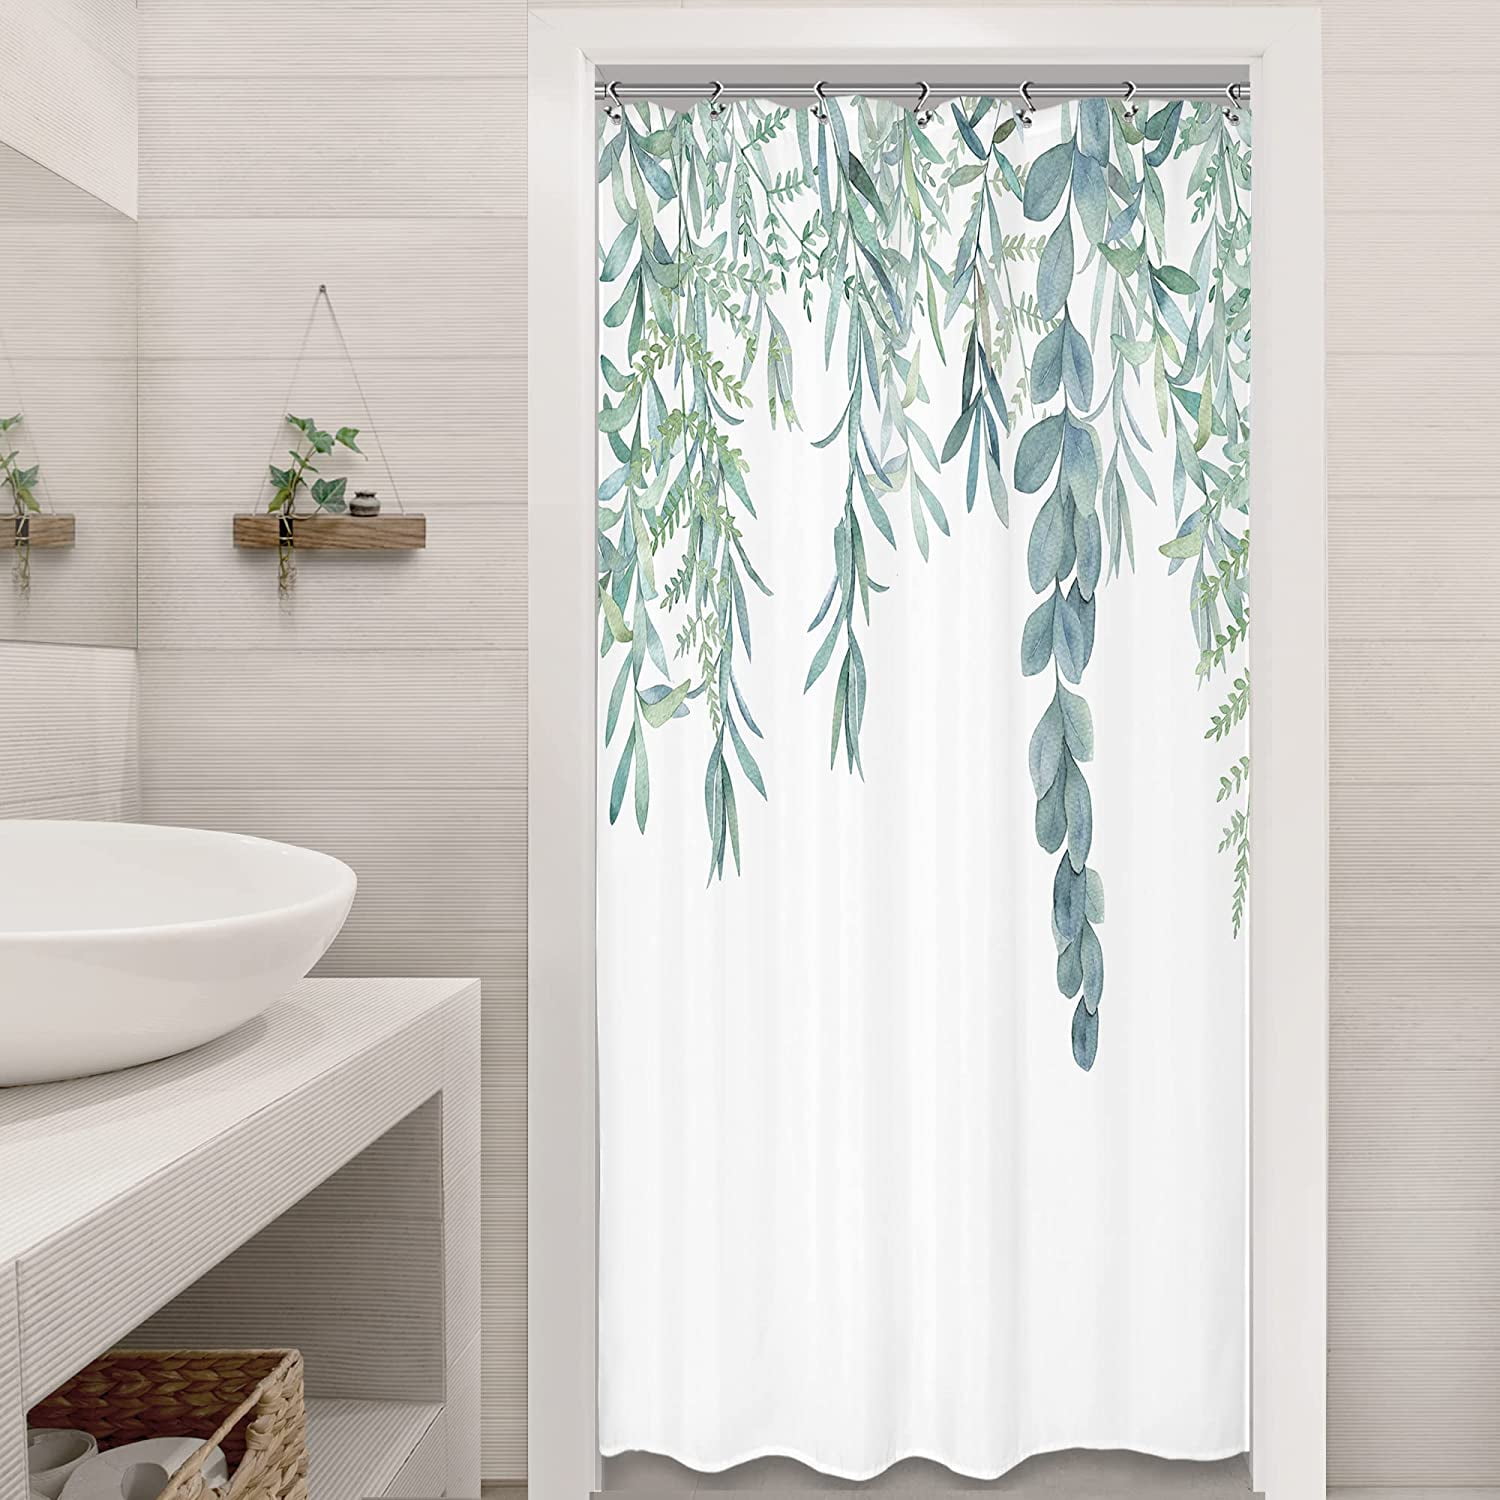 Watercolor Green Leaves Shower Curtain Nature Plants Bathroom Accessories Set 